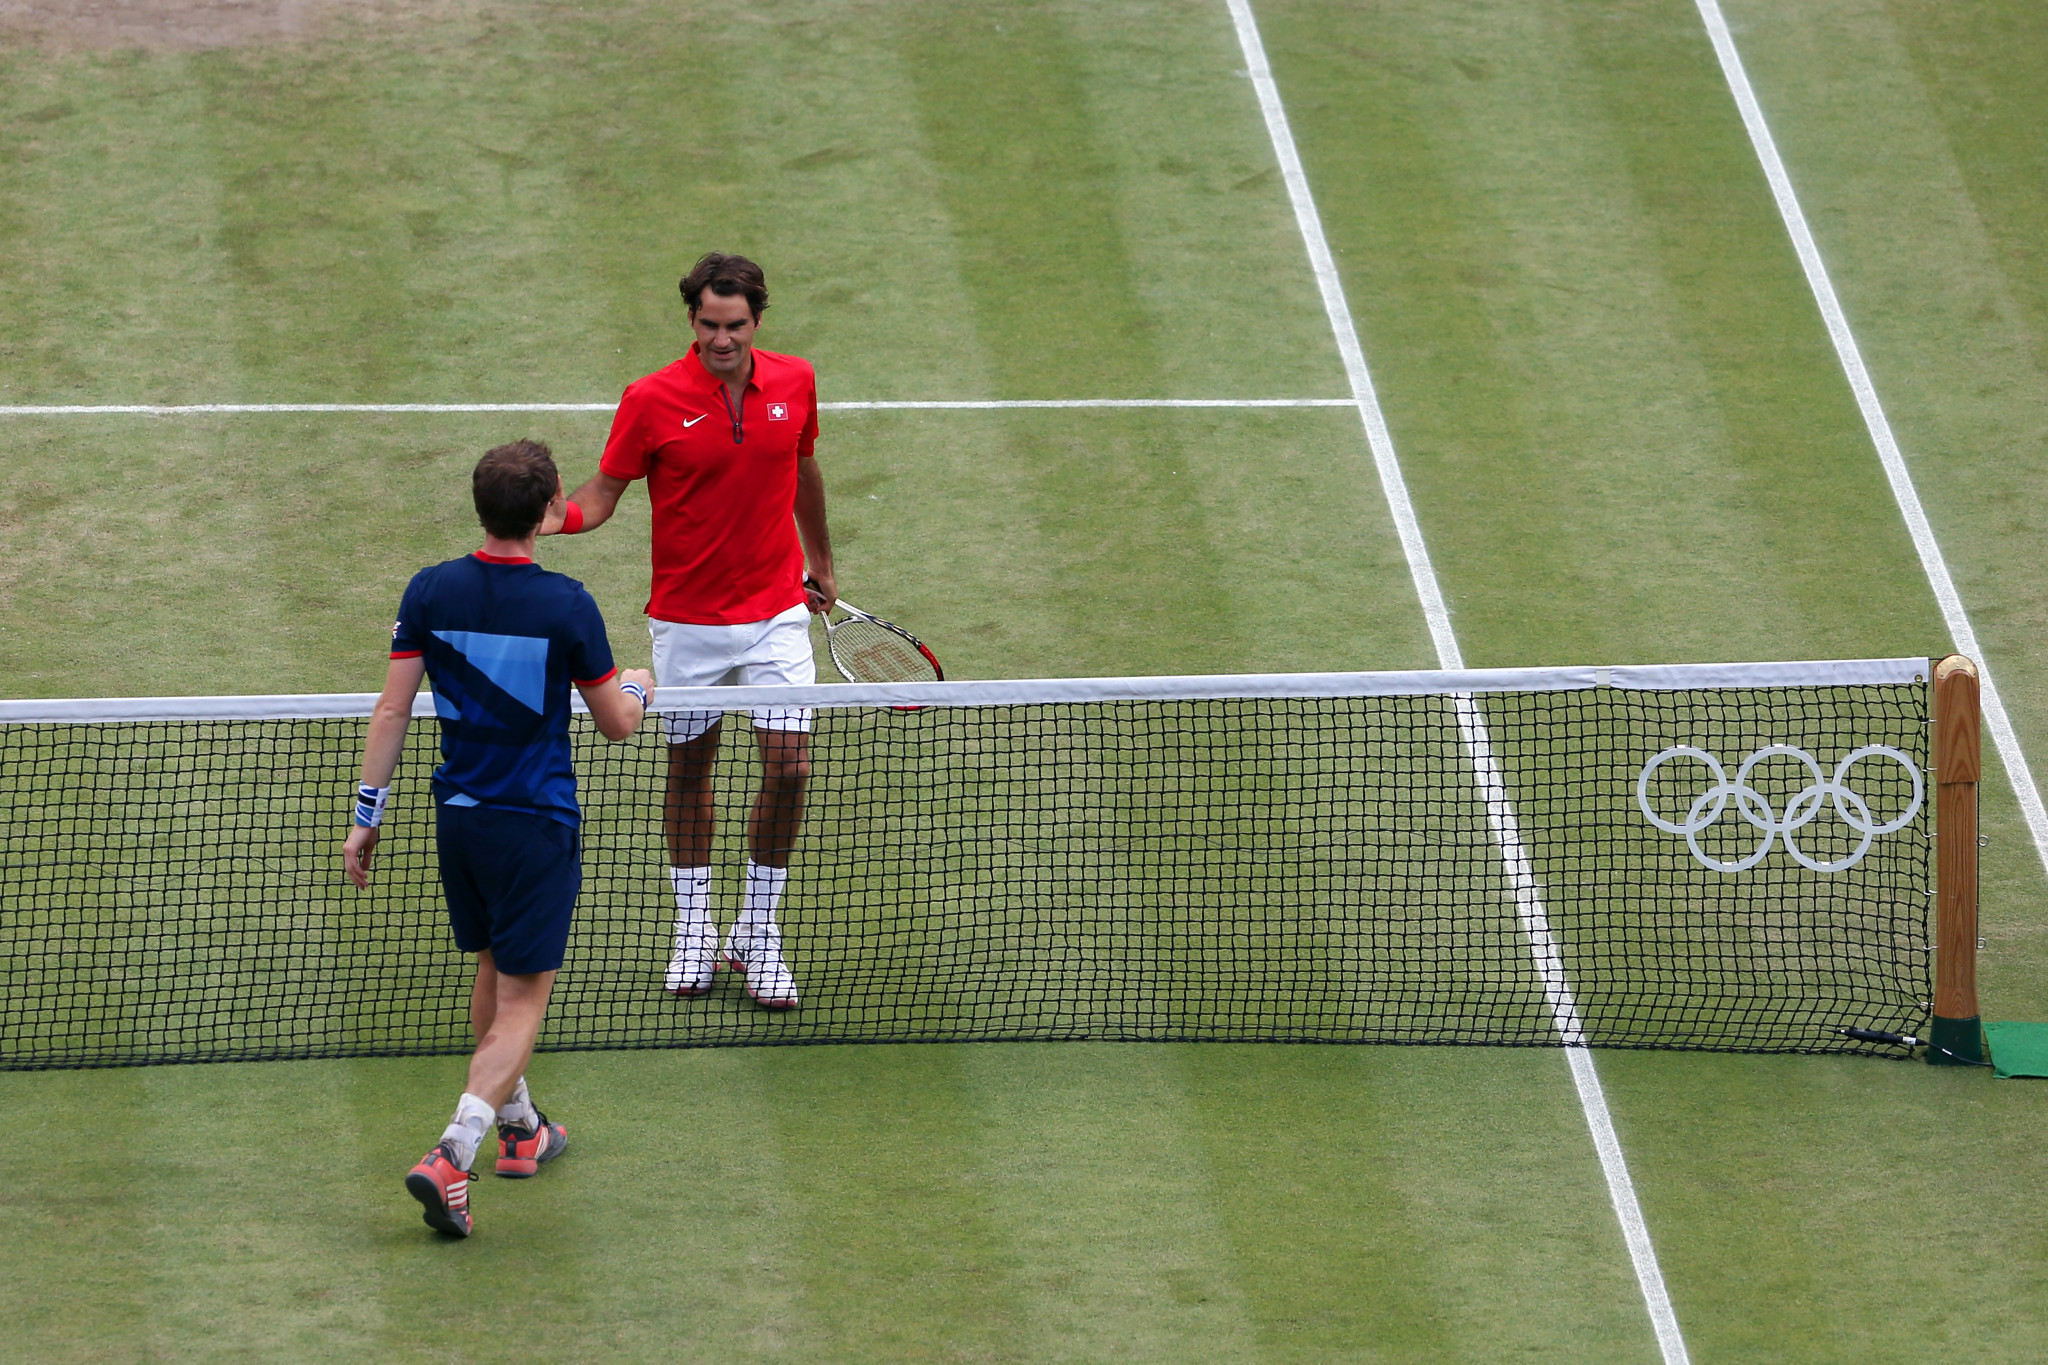 Roger Federer was beaten by Andy Murray in the men's singles final at London 2012 ©Getty Images